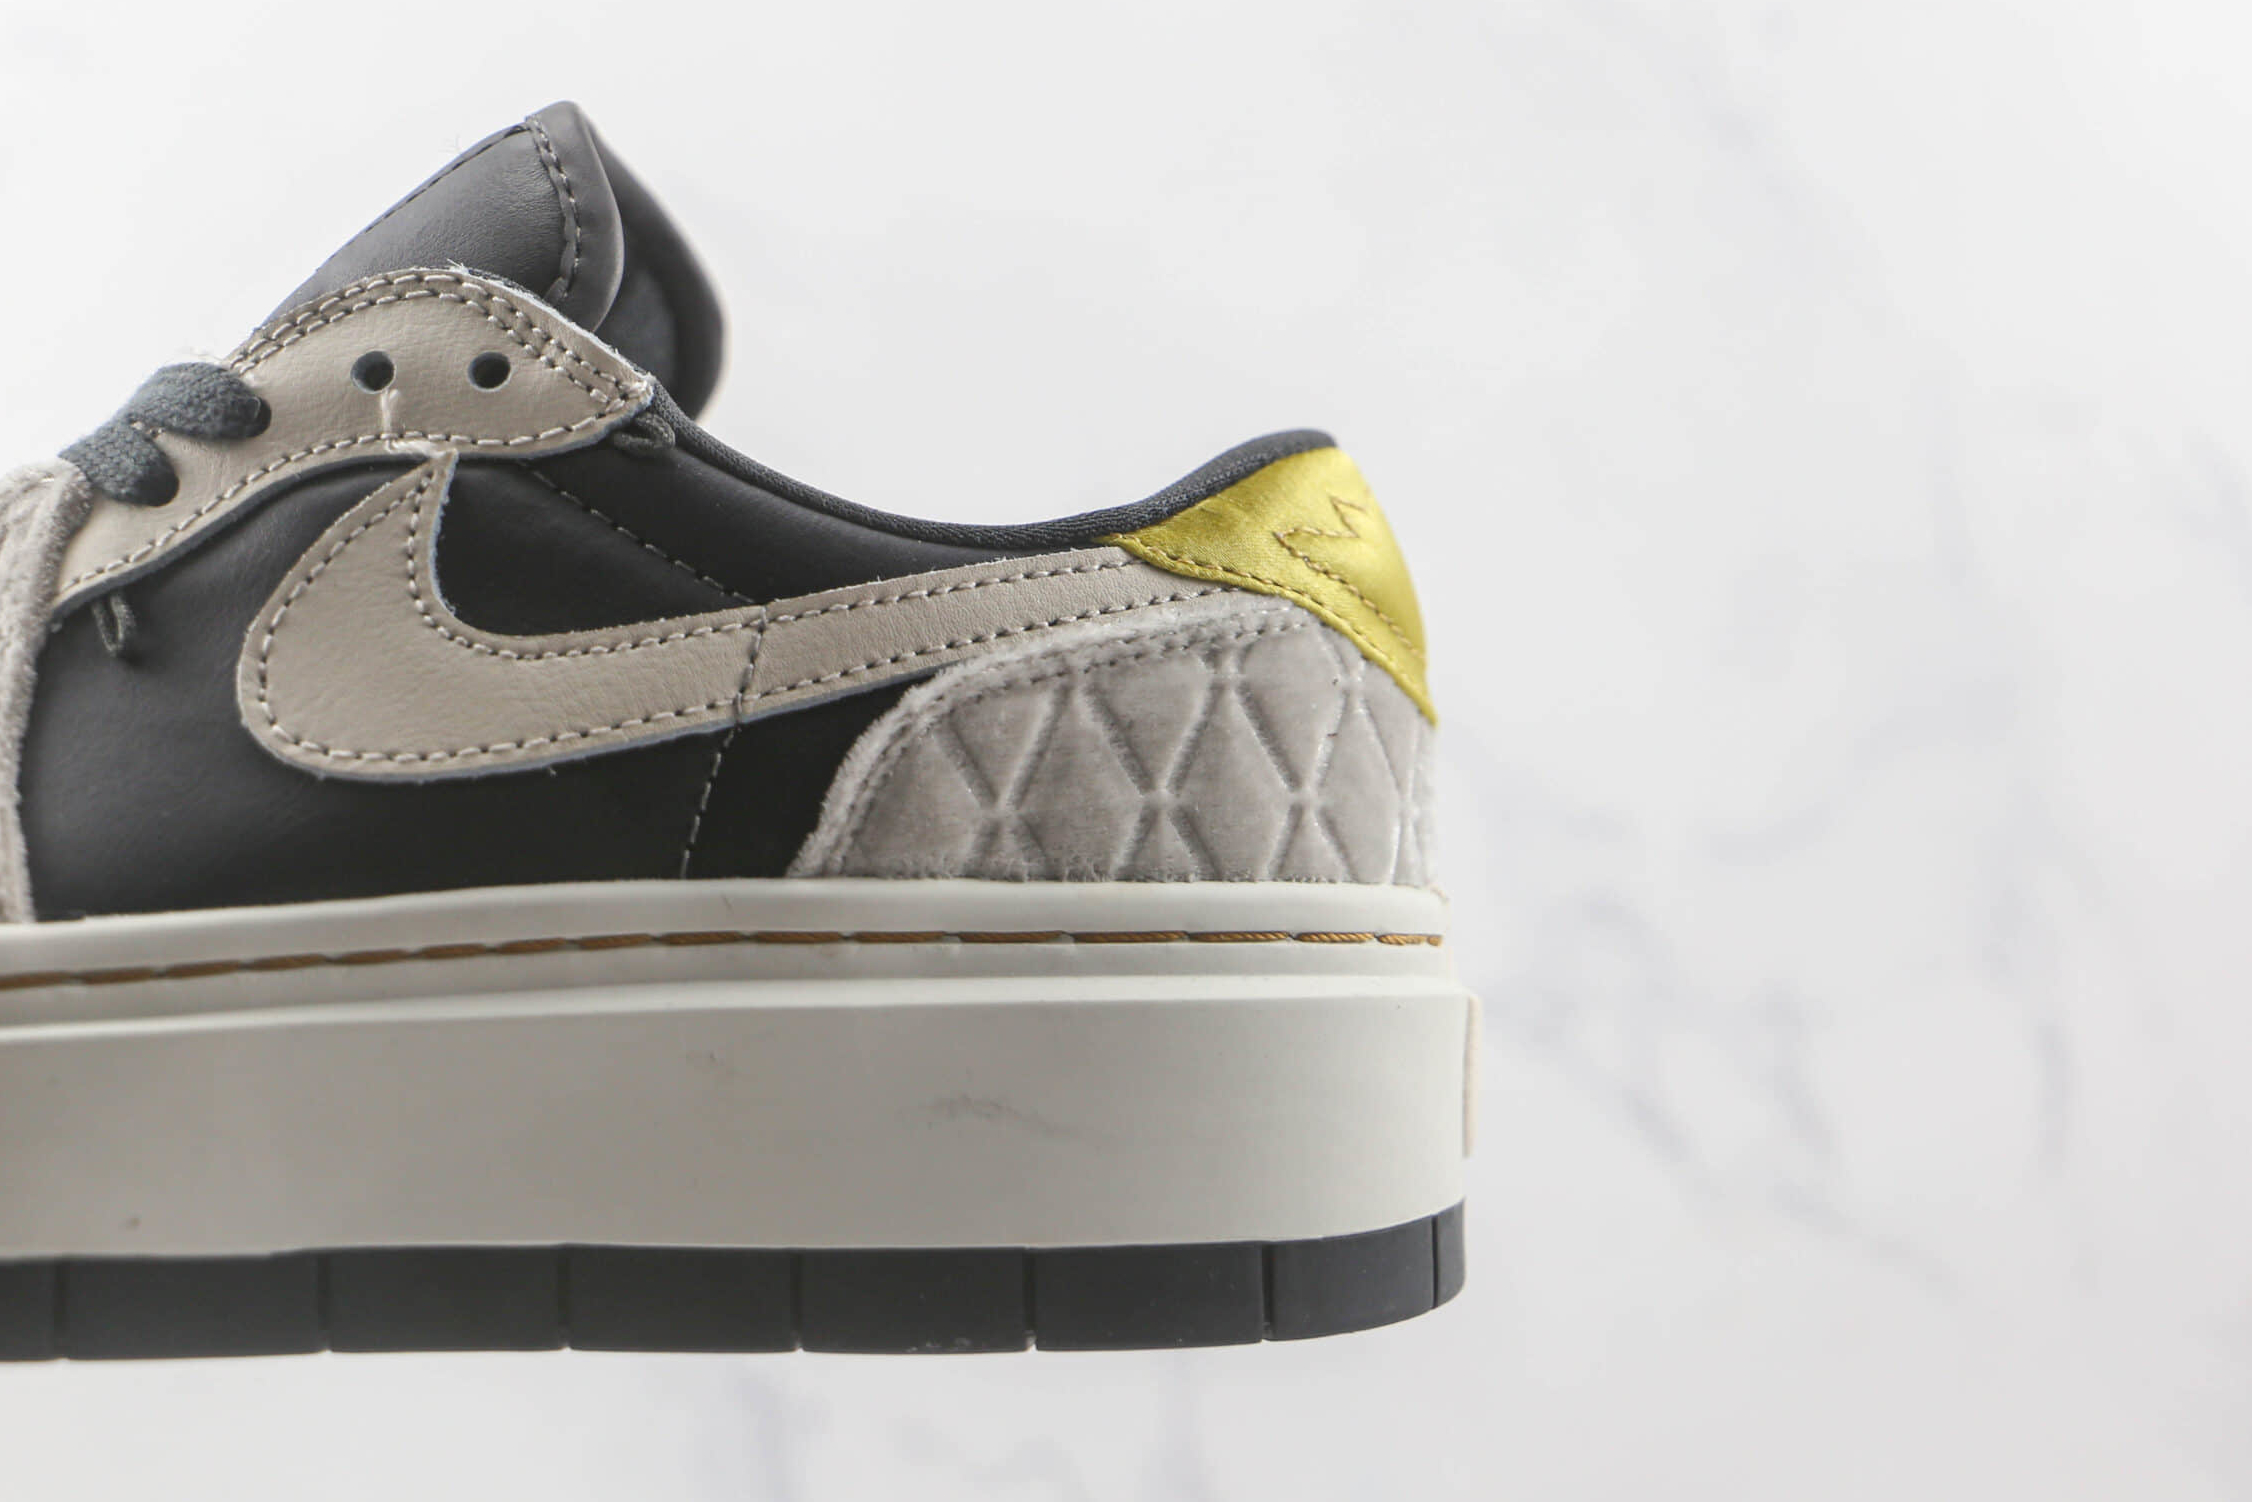 Air Jordan 1 Elevate Low SE 'Removable Beads' DV1494-001 | Stylish and Versatile Sneakers